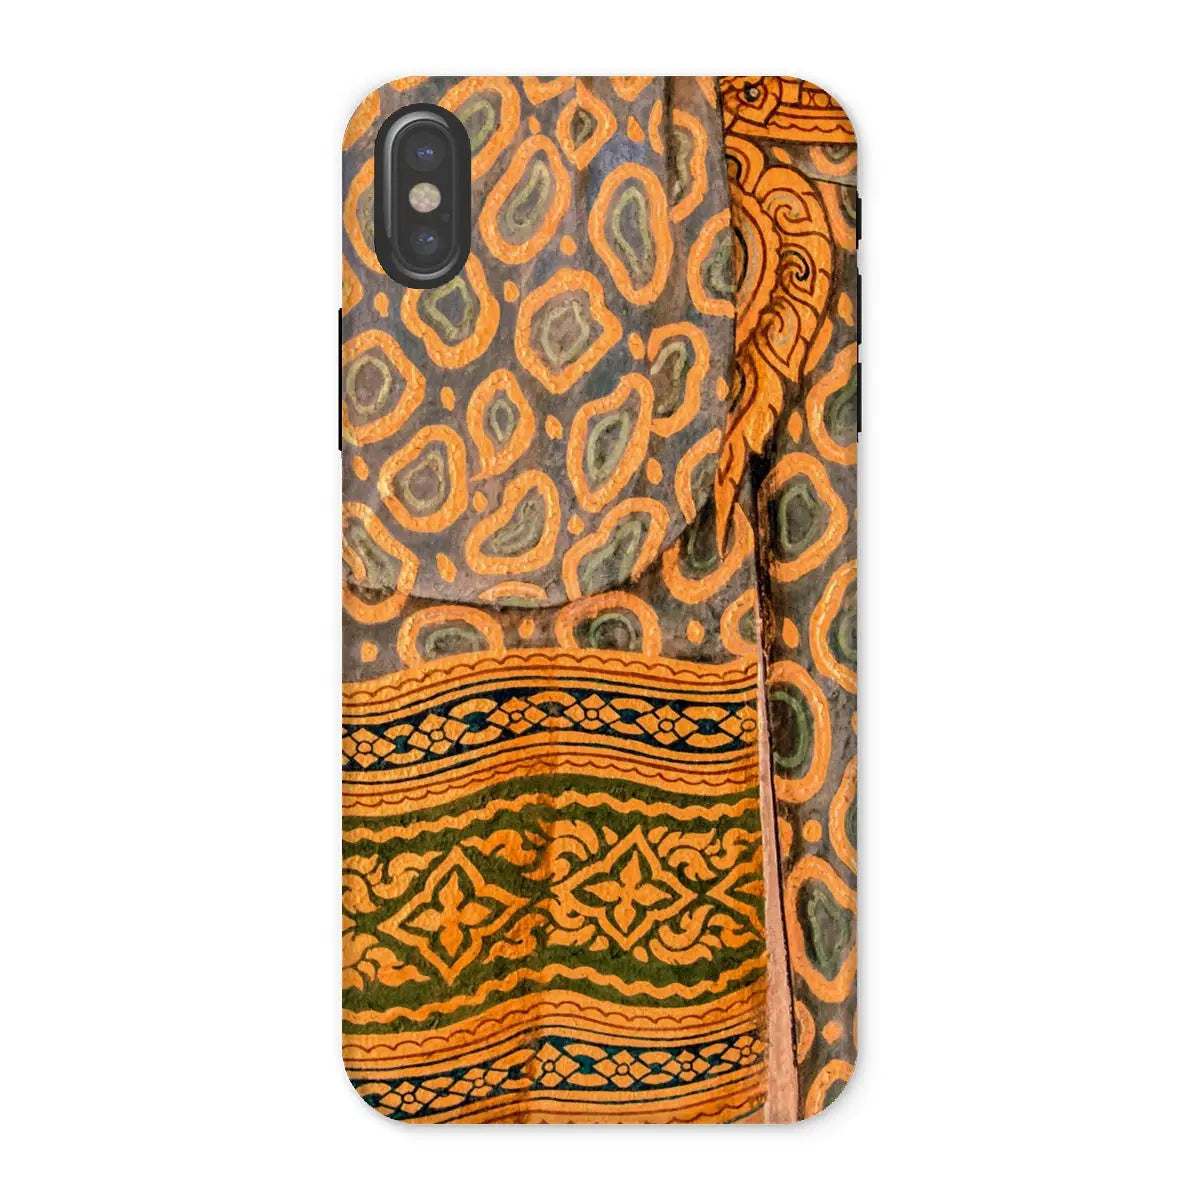 Lady In Waiting - Royal Siam Mural Art Phone Case - Iphone x / Matte - Mobile Phone Cases - Aesthetic Art